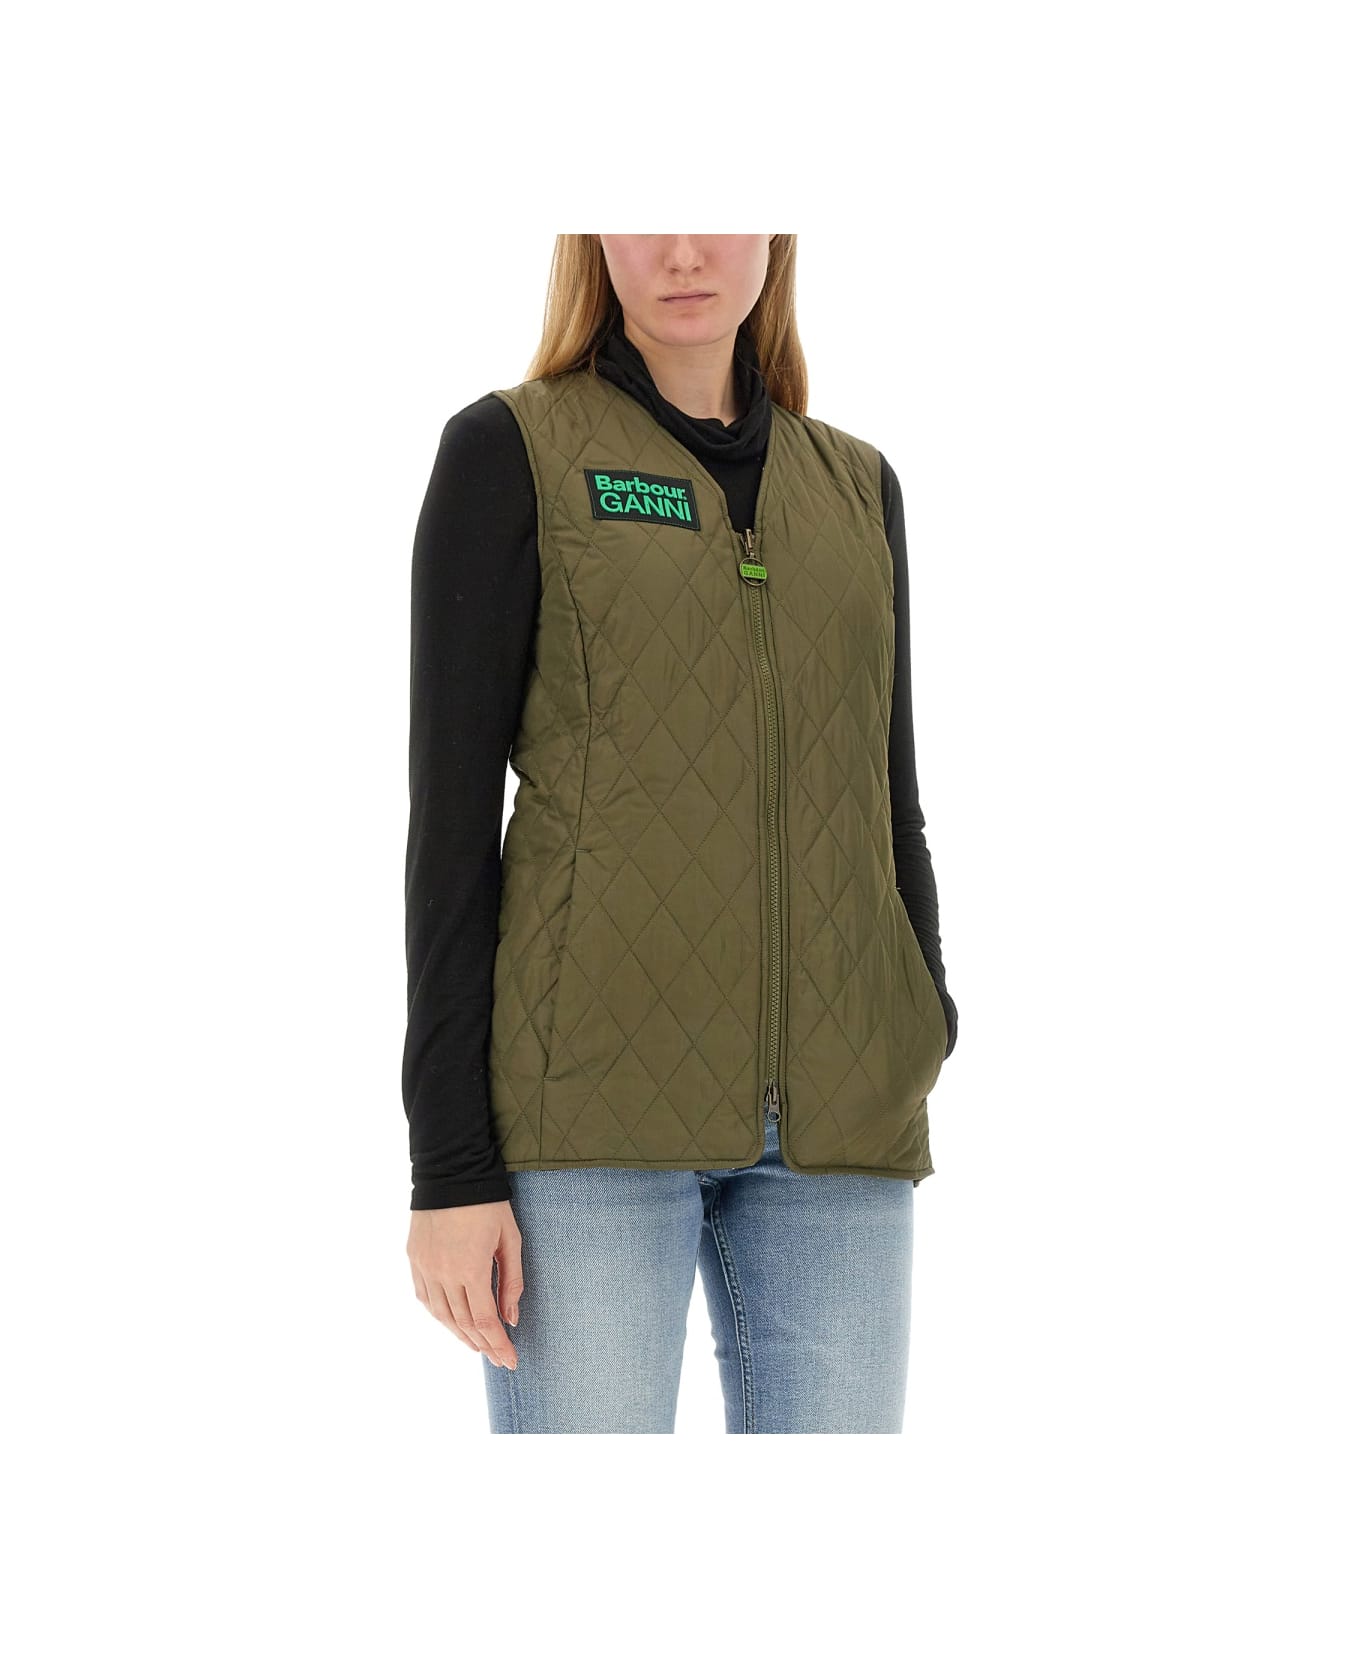 Barbour "betty" Reversible Vest - MILITARY GREEN